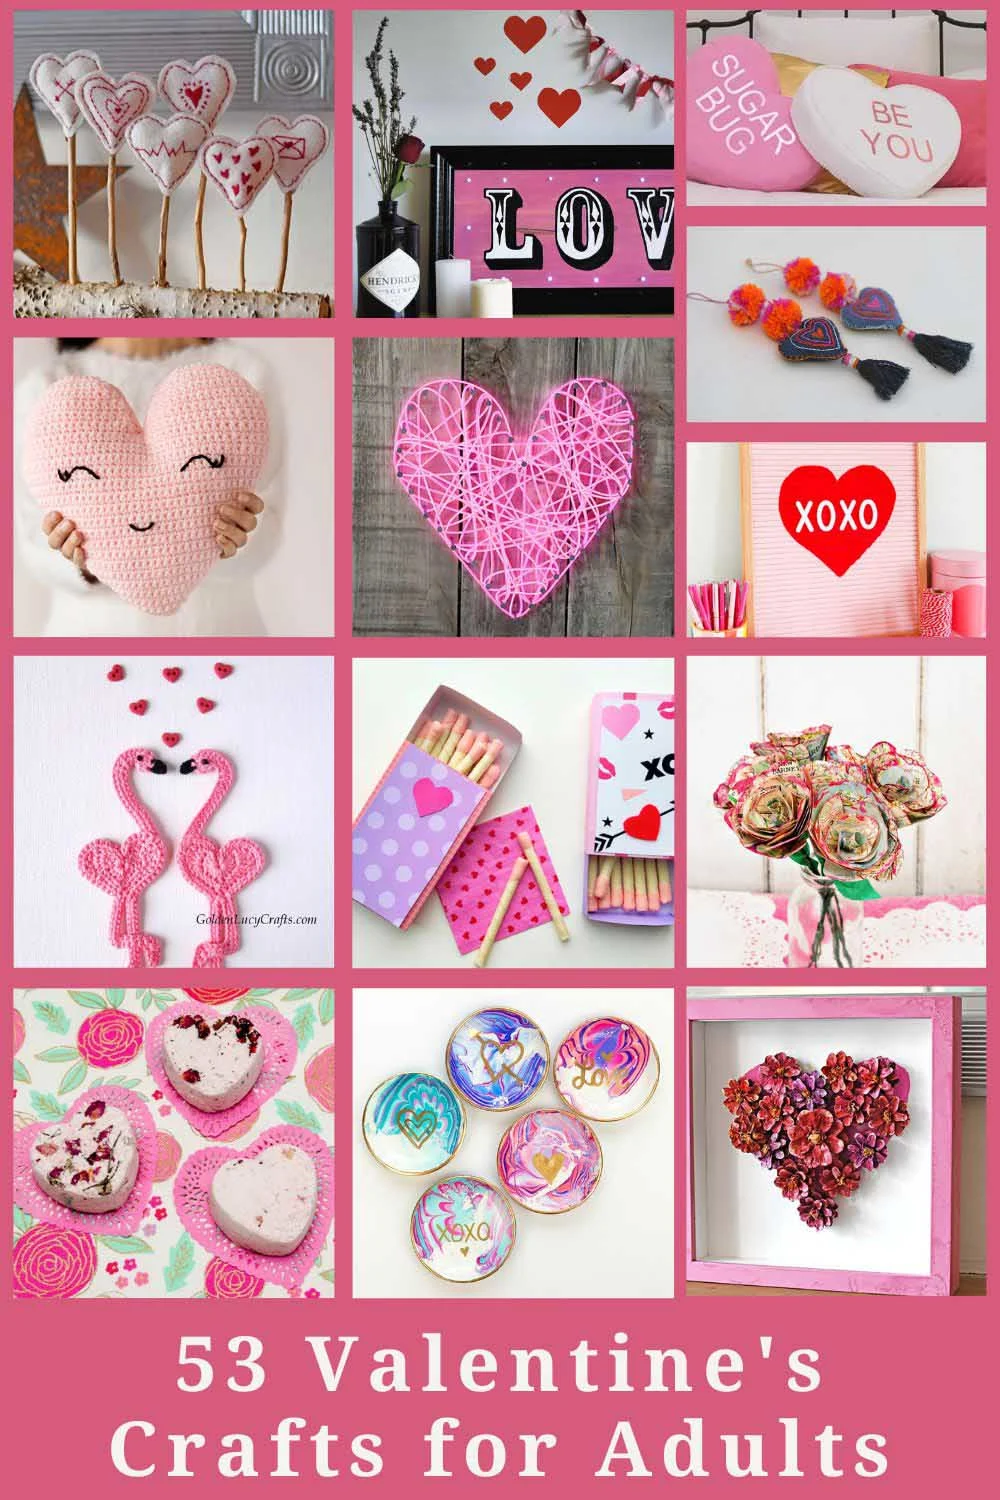 Valentine's Day Crafts for Preschoolers: 26 projects to make together